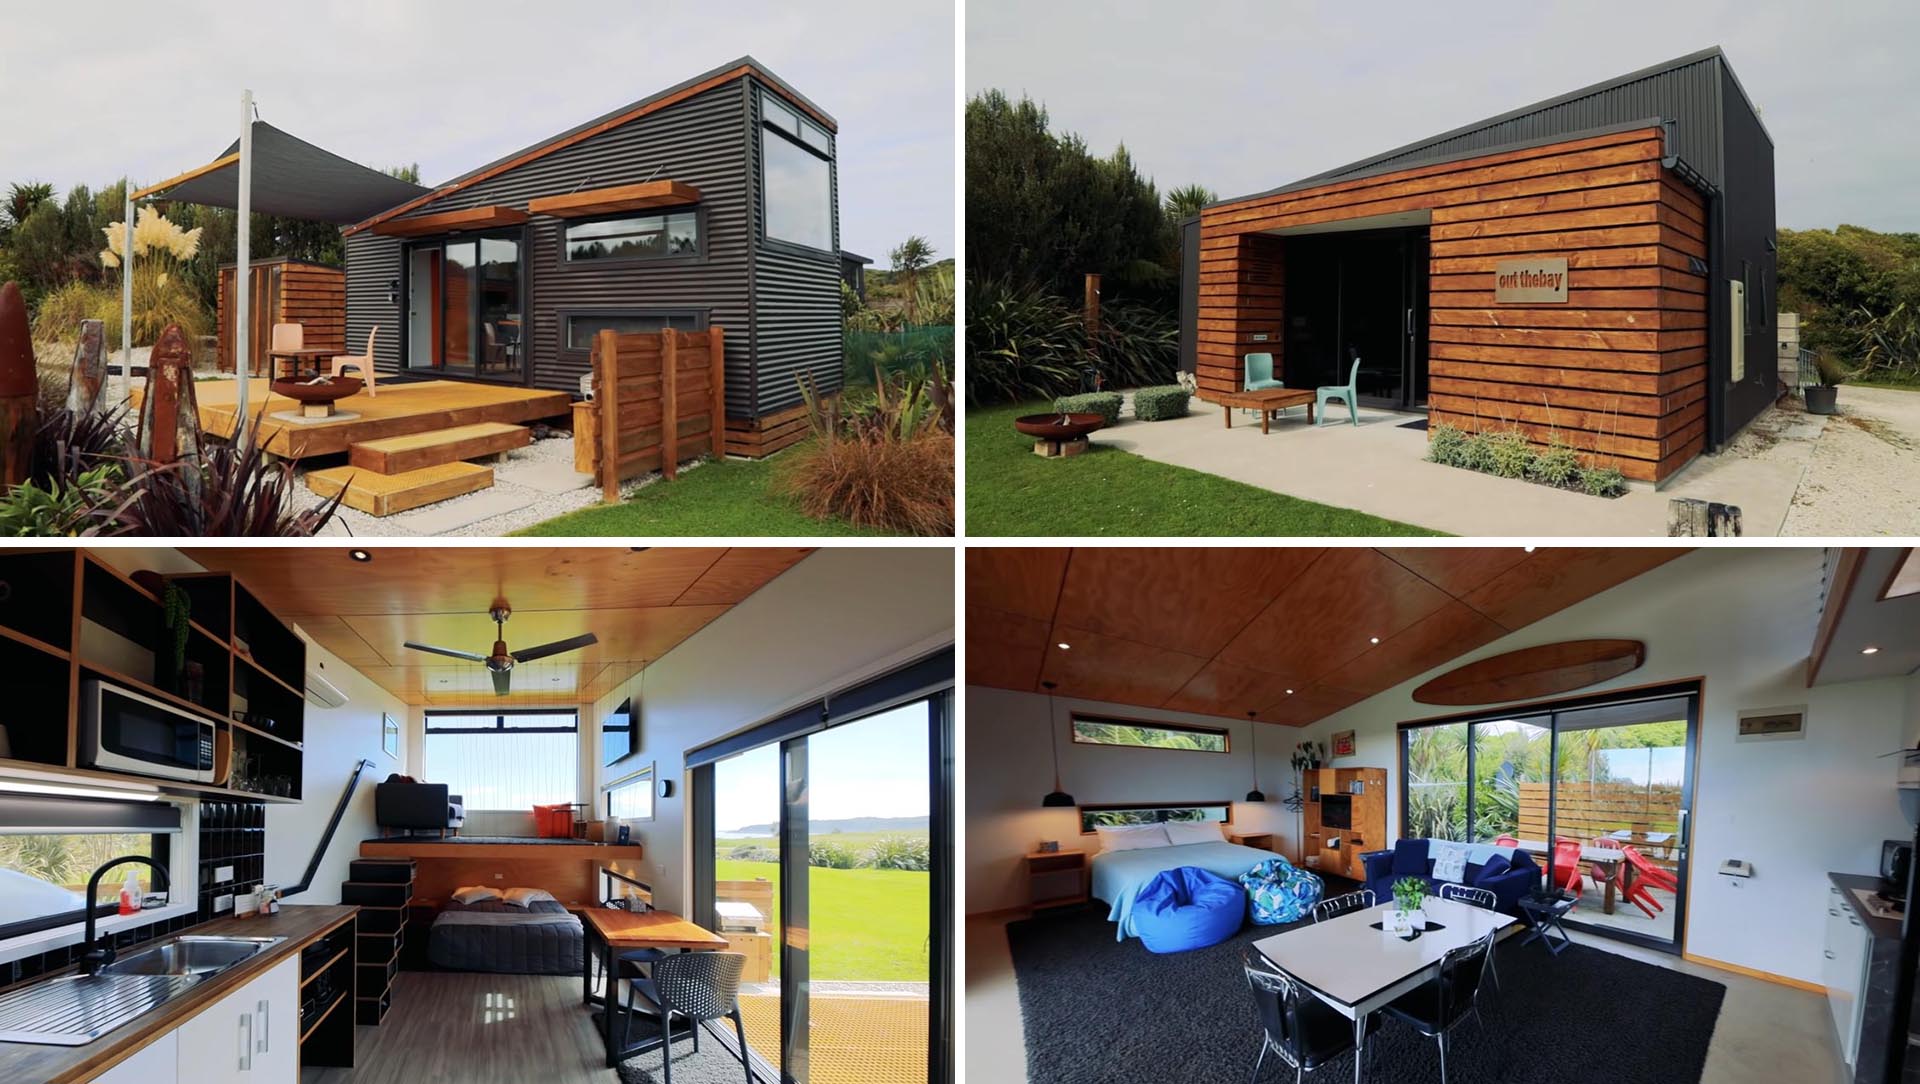 A pair of modern tiny homes that are rented out as holiday rentals.